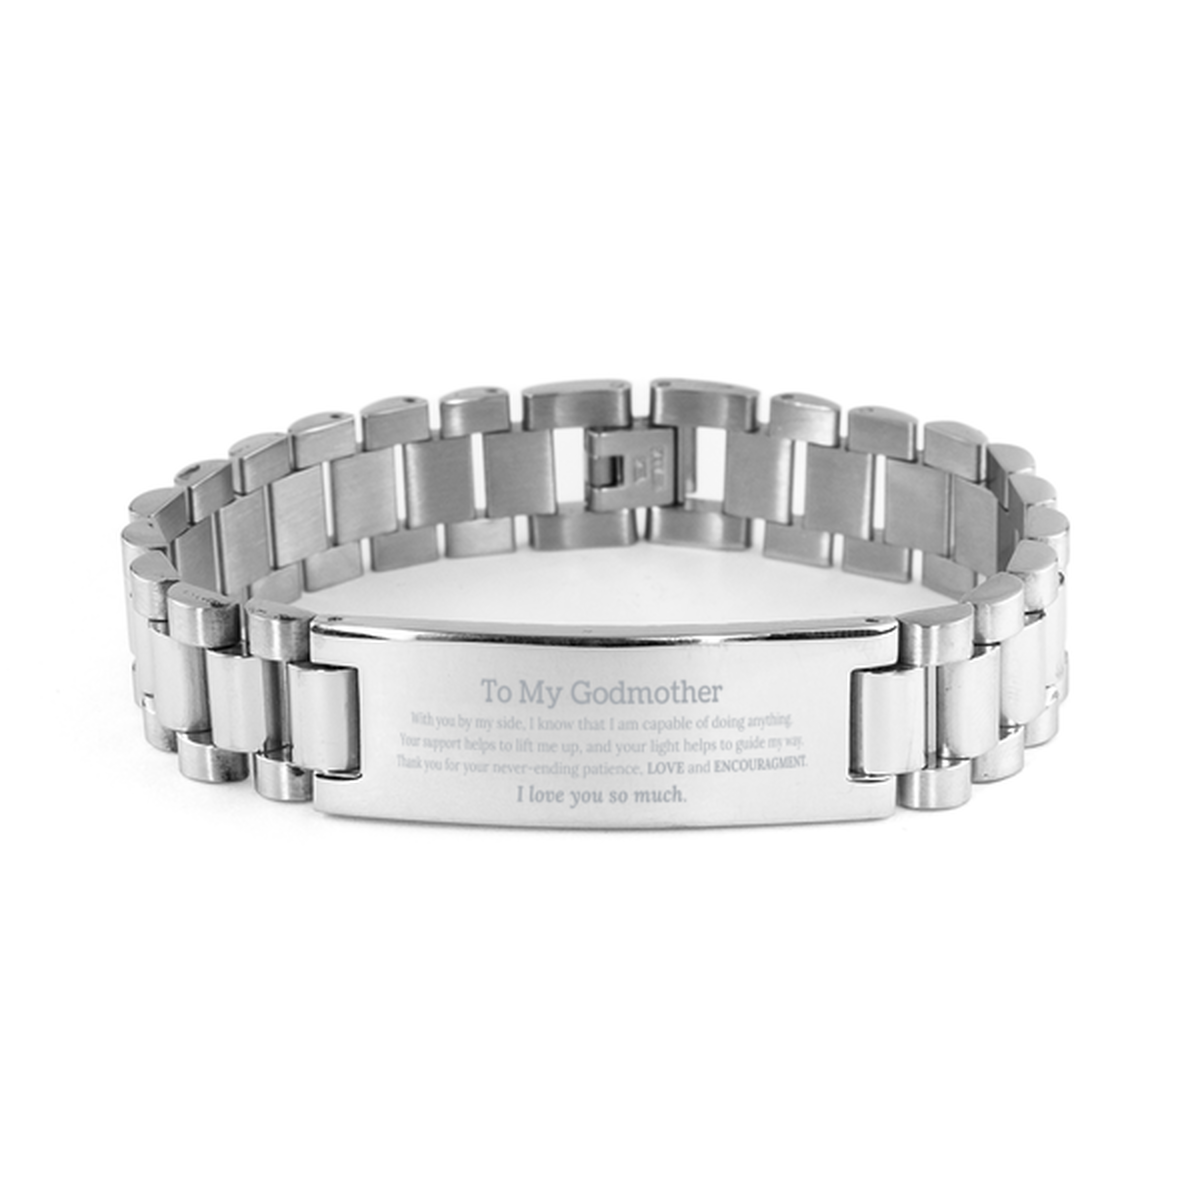 Appreciation Godmother Ladder Stainless Steel Bracelet Gifts, To My Godmother Birthday Christmas Wedding Keepsake Gifts for Godmother With you by my side, I know that I am capable of doing anything. I love you so much